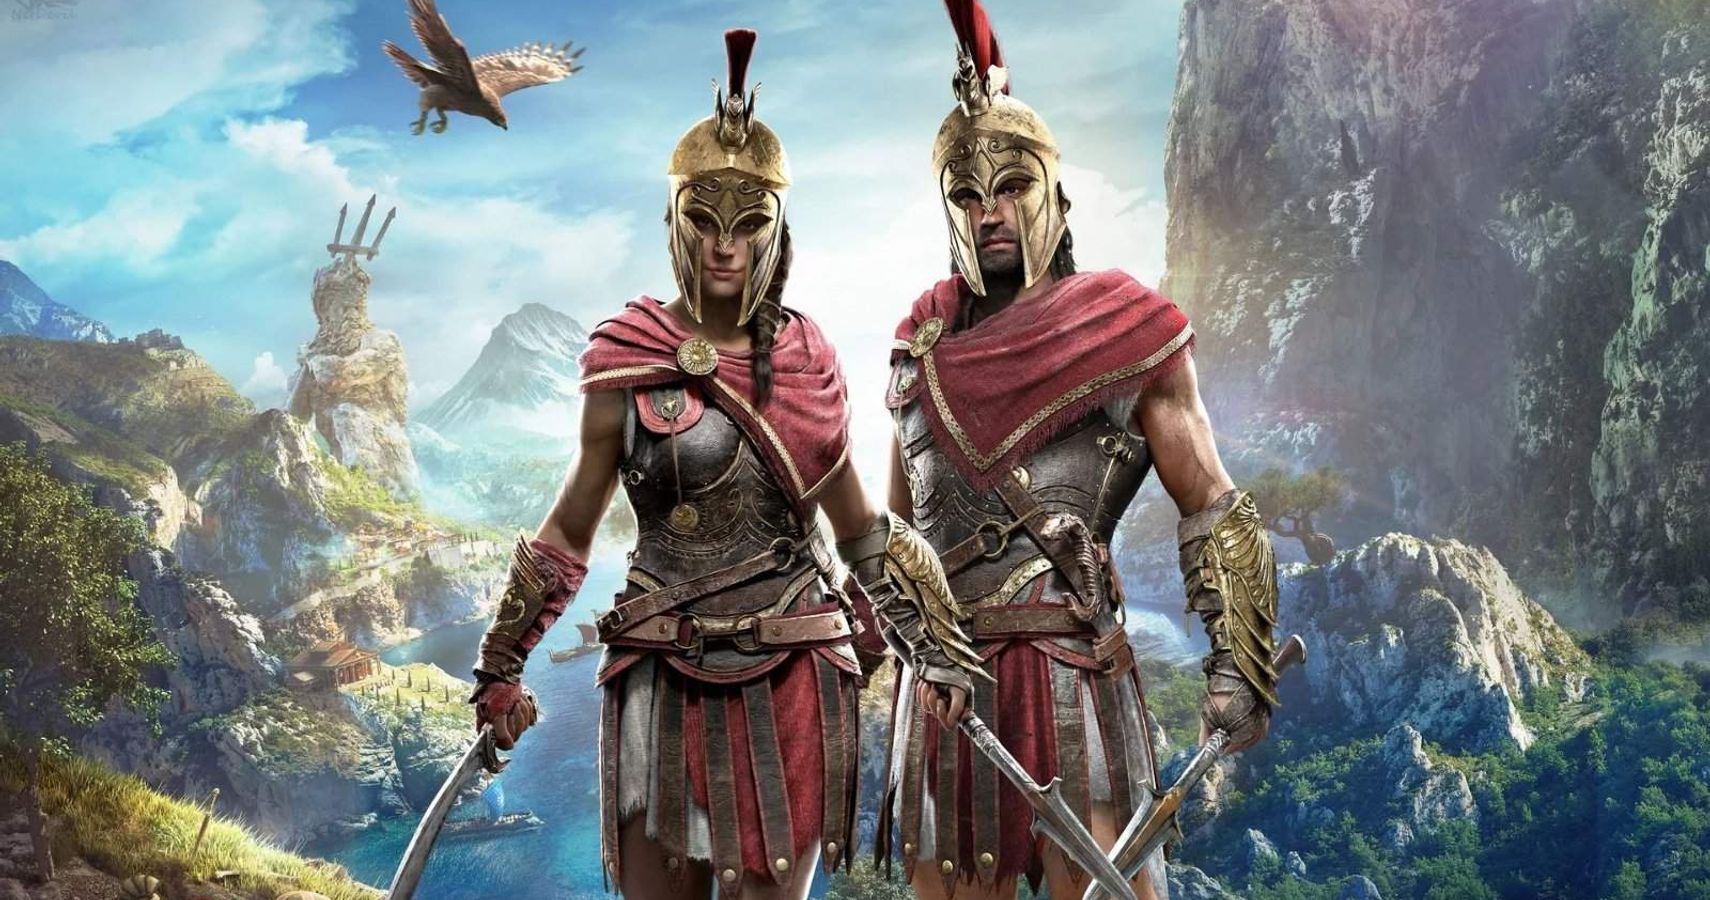 Assassin's Creed Odyssey Tips ⭐ Become The Best Warrior